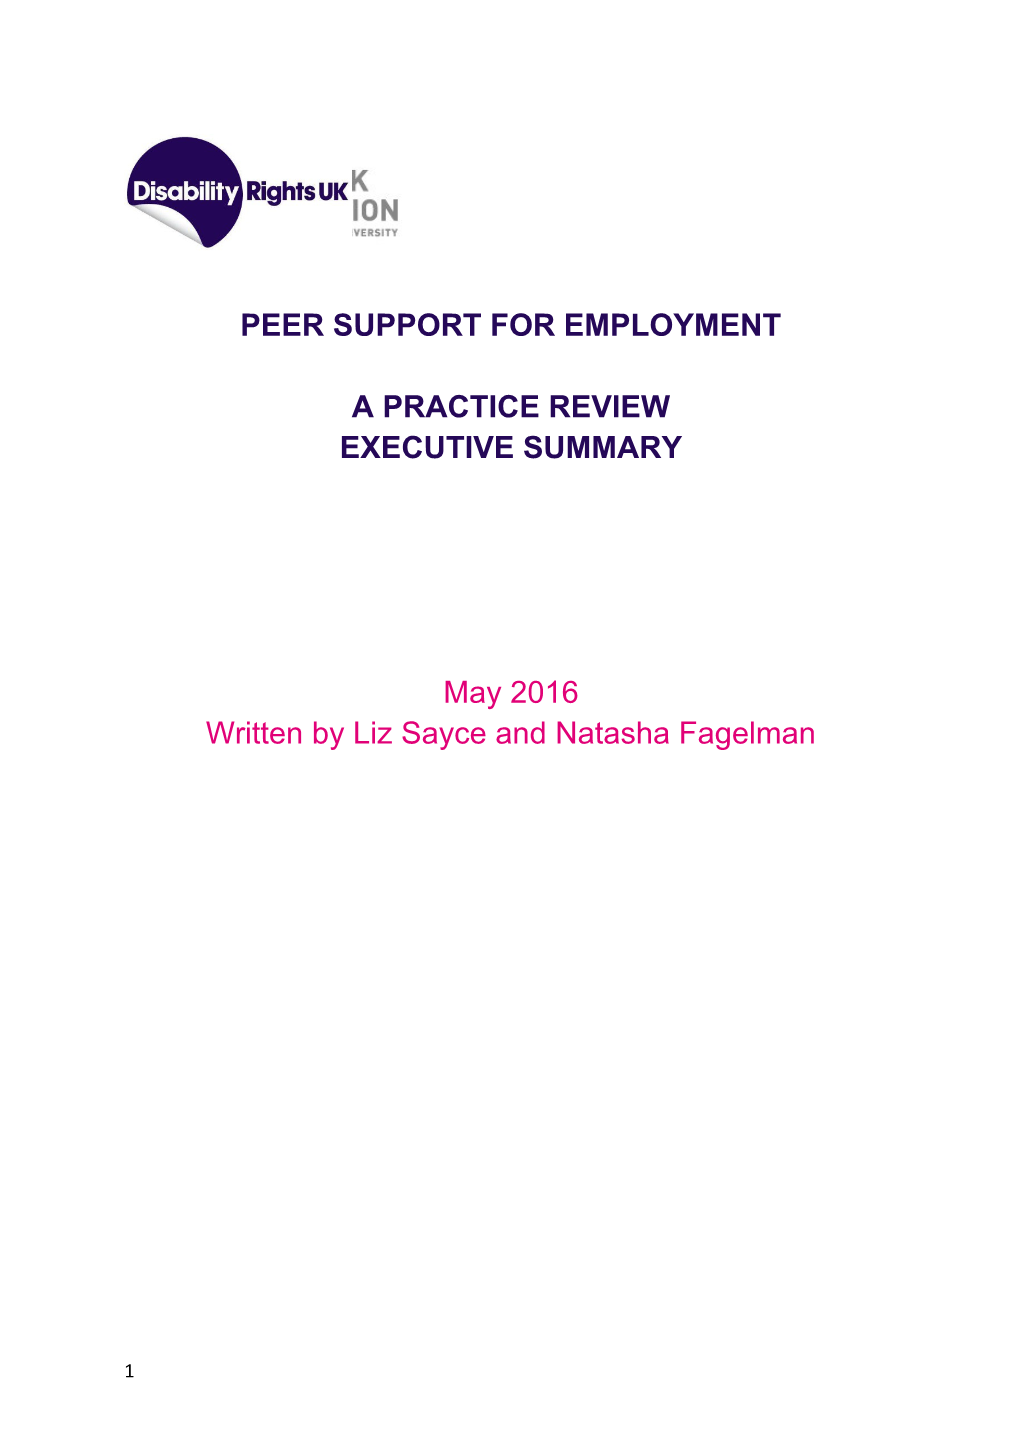 Peer Support for Employment